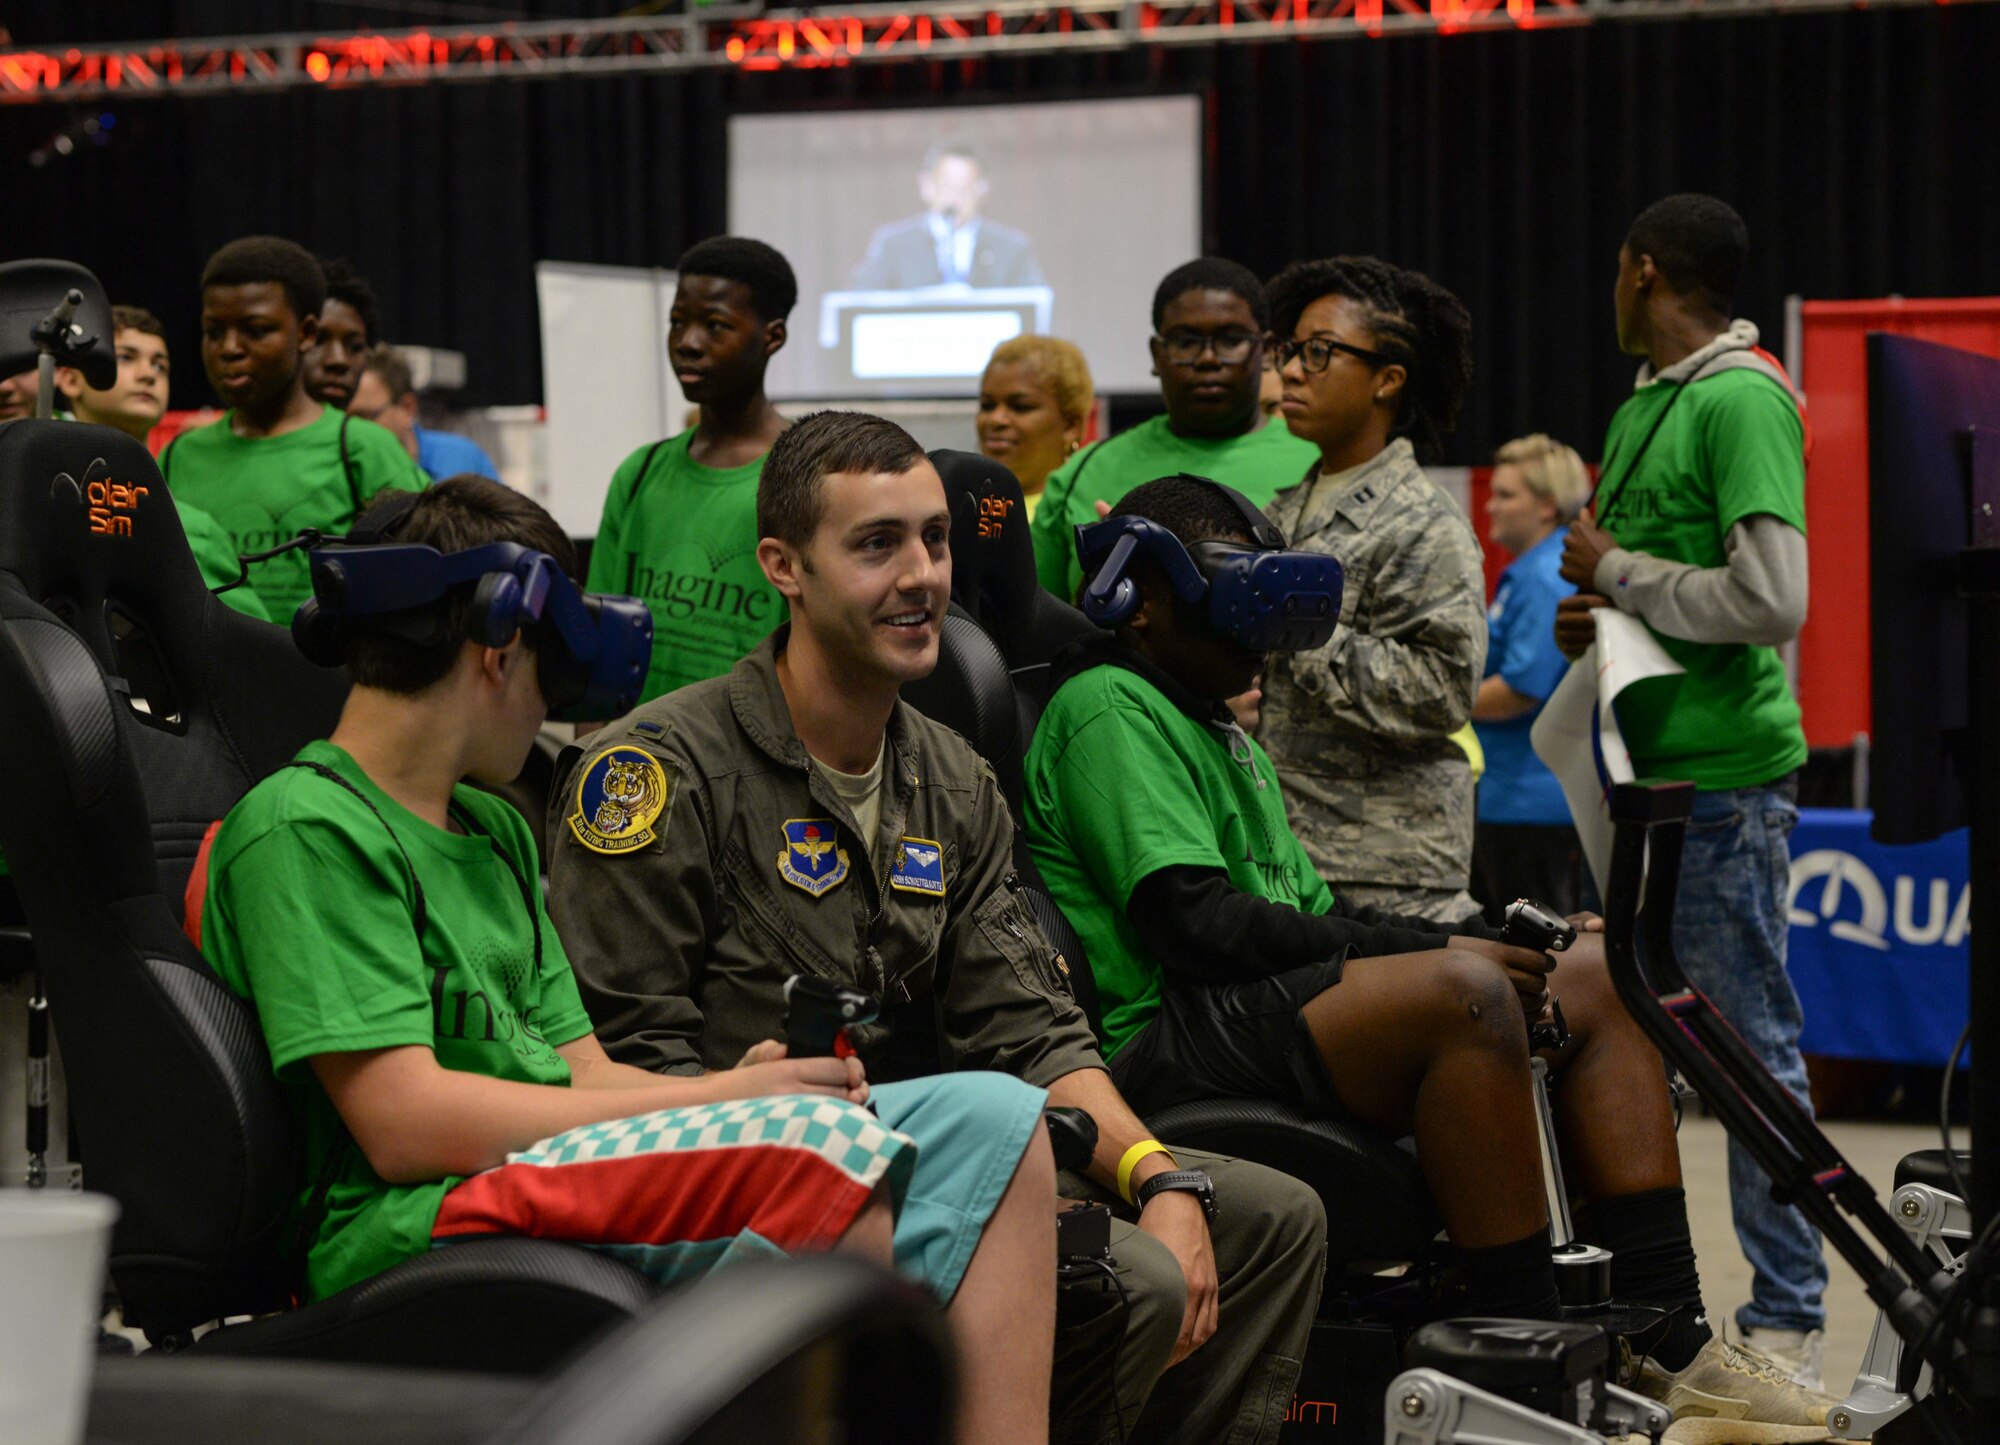 First Lt. John Schoettelkotte, a 37th Flying Training Squadron instructor pilot at Columbus Air Force Base, Miss., helps a student operate virtual reality simulator at a convention in Tupelo, Miss., October 1, 2019. Student pilots at Columbus Air Force Base use simulators to train and become comfortable with mechanics before flying an aircraft. (U.S. Air Force photo by Airman Davis Donaldson)